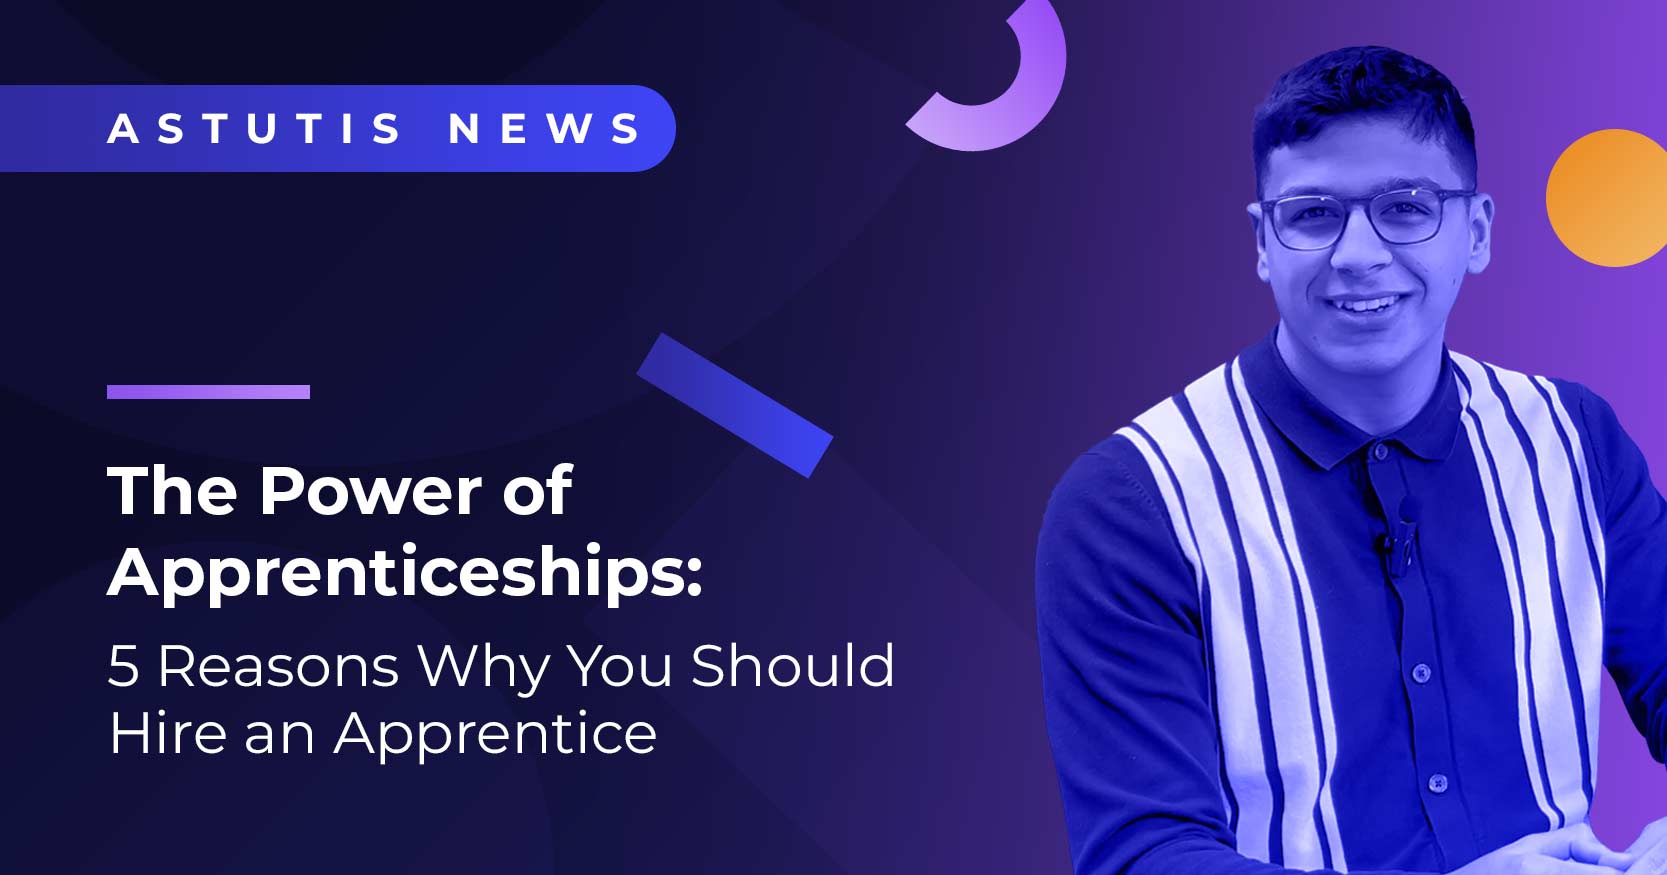 The Power of Apprenticeships: 5 Reasons Why You Should Hire an Apprentice Image